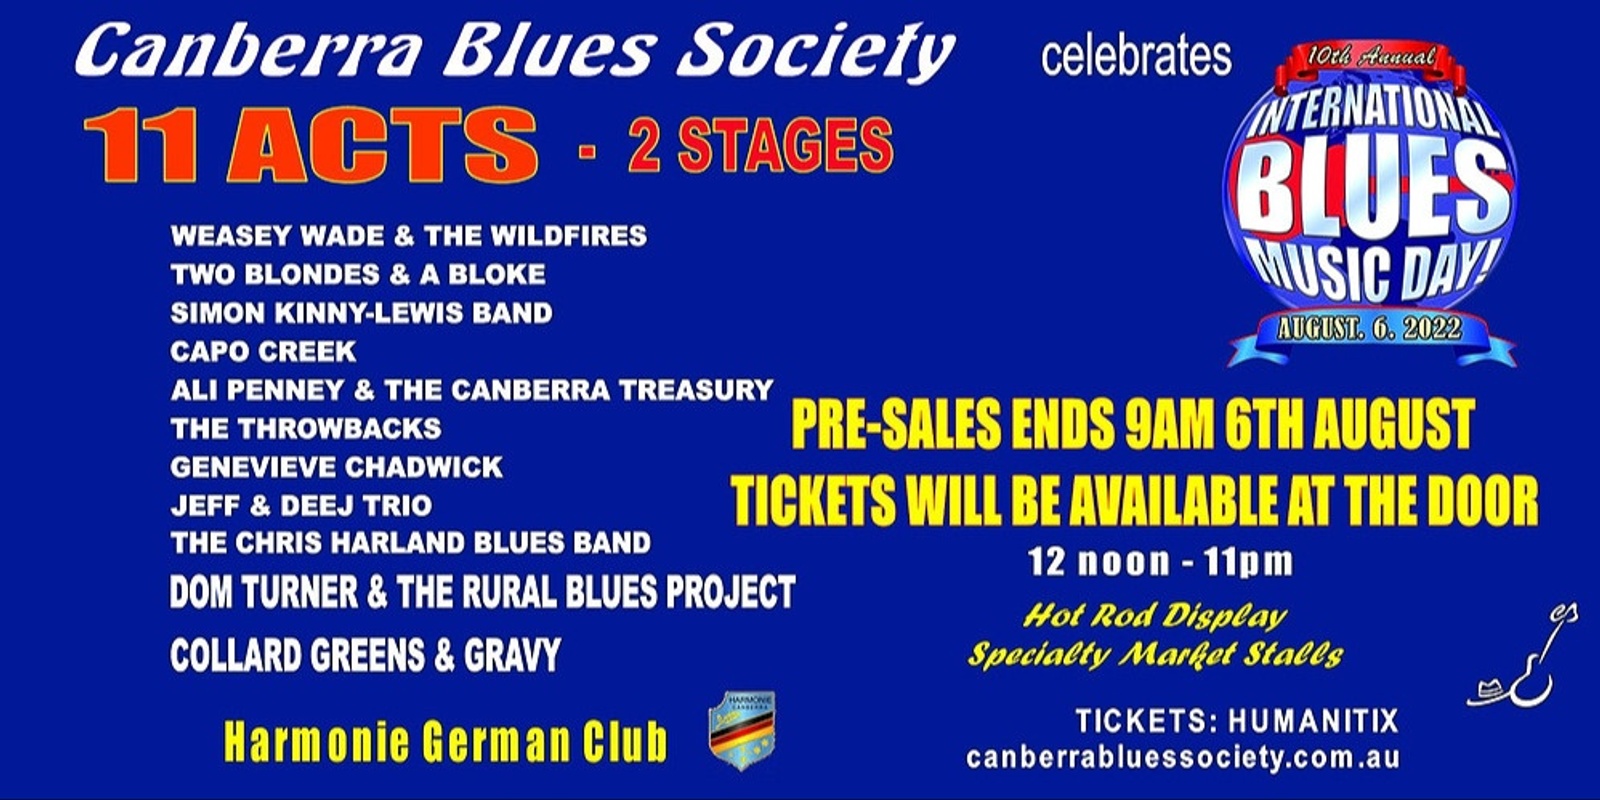 Banner image for International Blues Music Day 2022